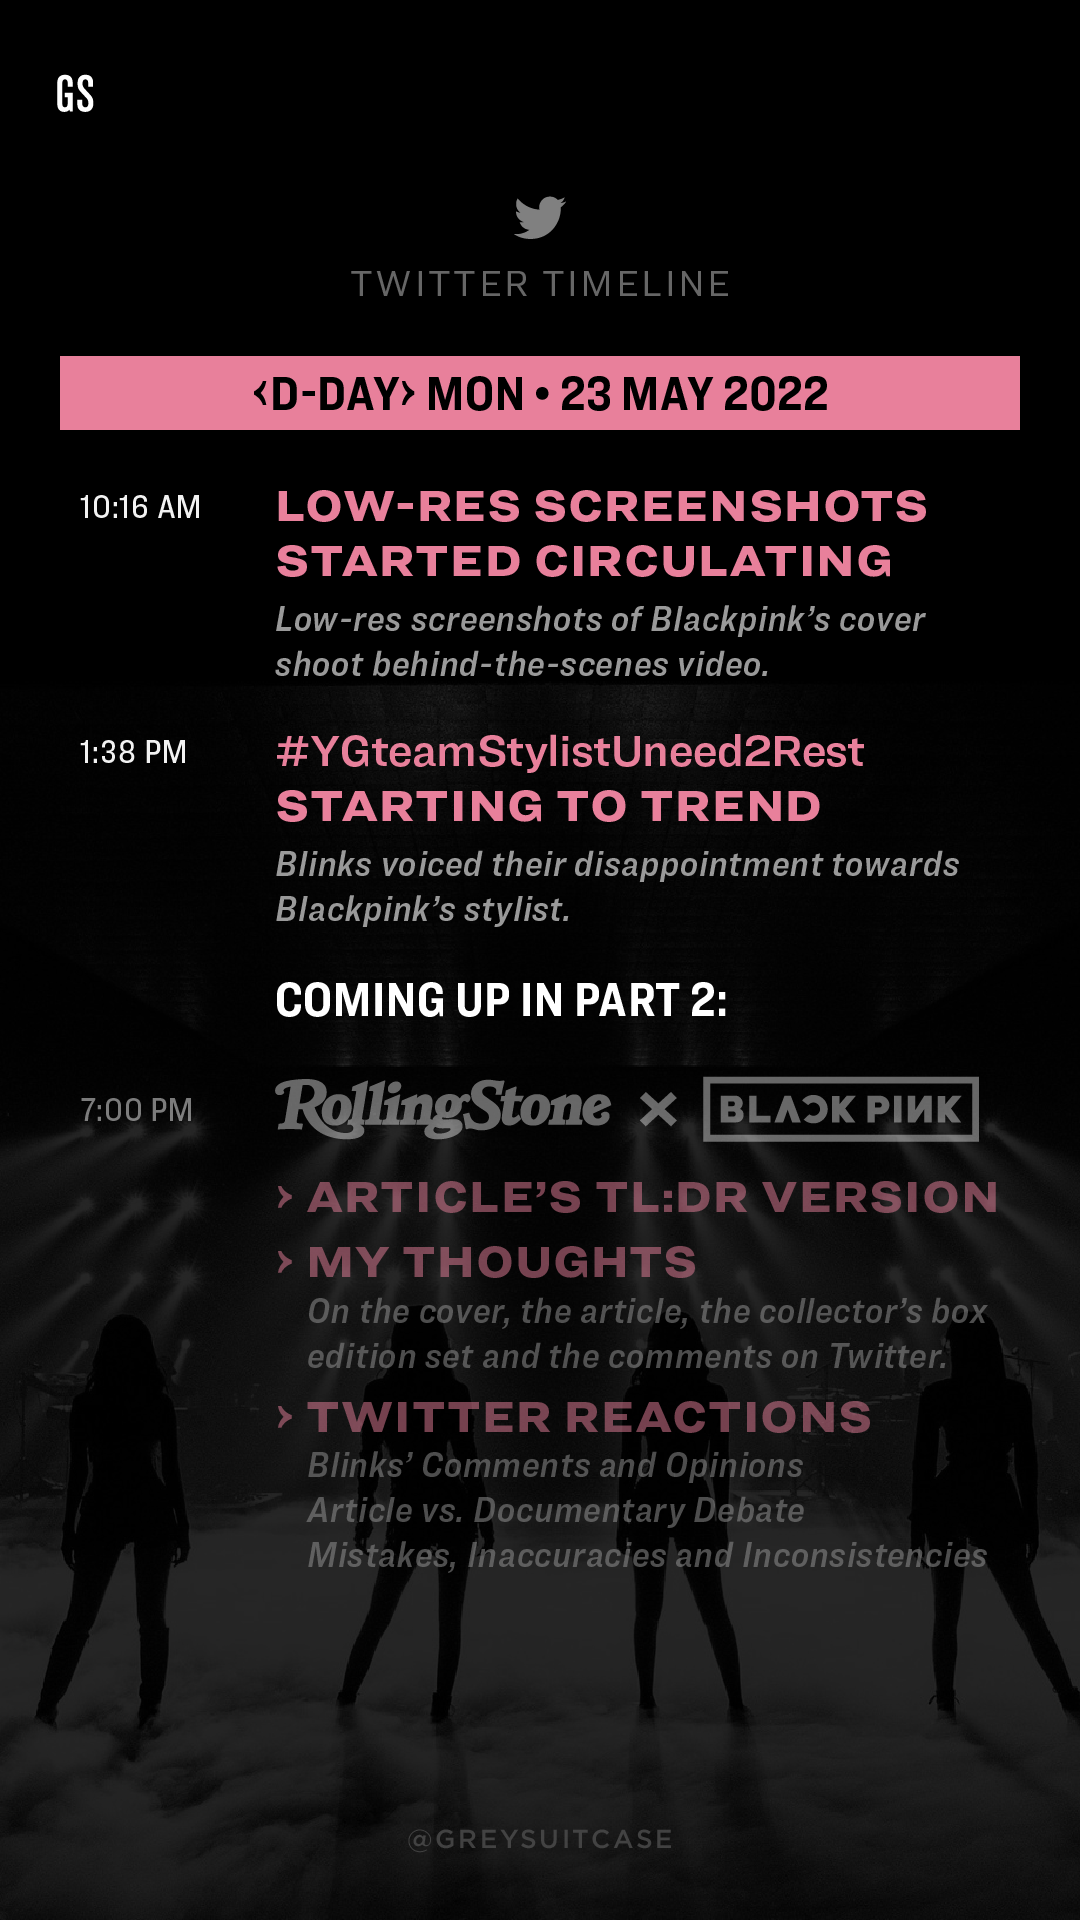  Blackpink x Rolling Stone Announcement Timeline, Twitter Reactions and Commentary 